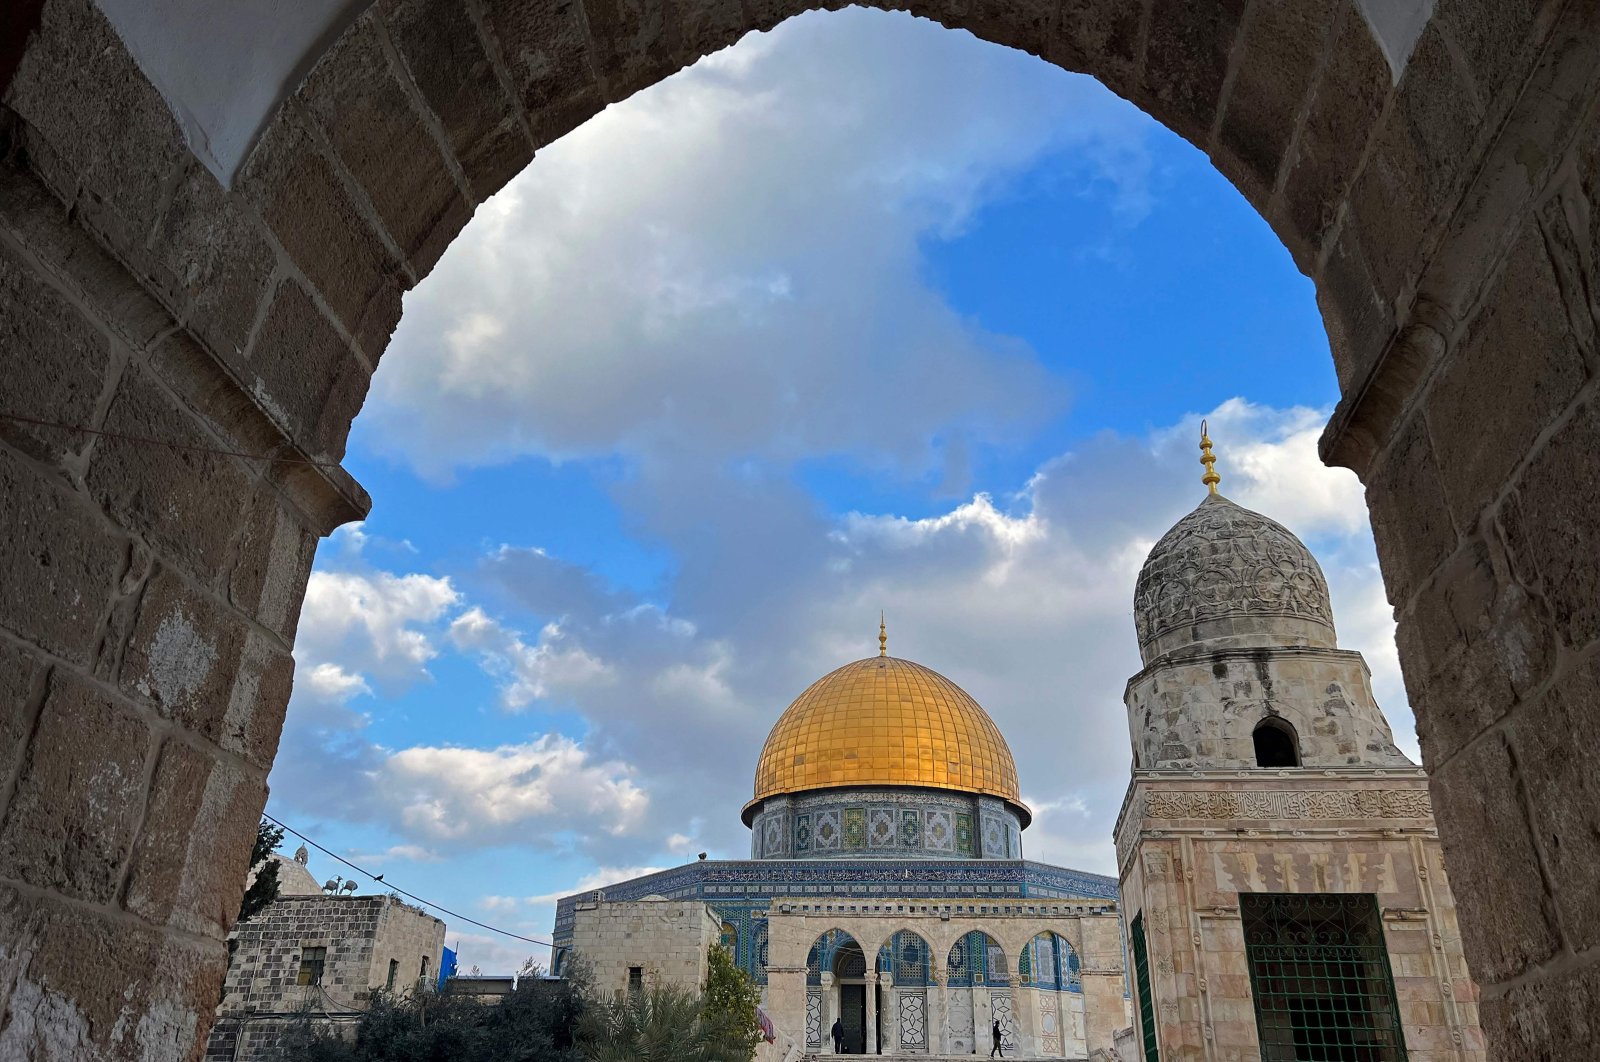 A general view of the Dome of the Rock is pictured at the compound of the Al-Aqsa Mosque in the Old City of East Jerusalem, occupied Palestine, Feb. 20, 2024. As the Gaza war rages and the Muslim holy month of Ramadan nears, concern has grown over potential tensions at Jerusalem&#039;s Al-Aqsa Mosque compound, a past flashpoint for violence. (AFP Photo)